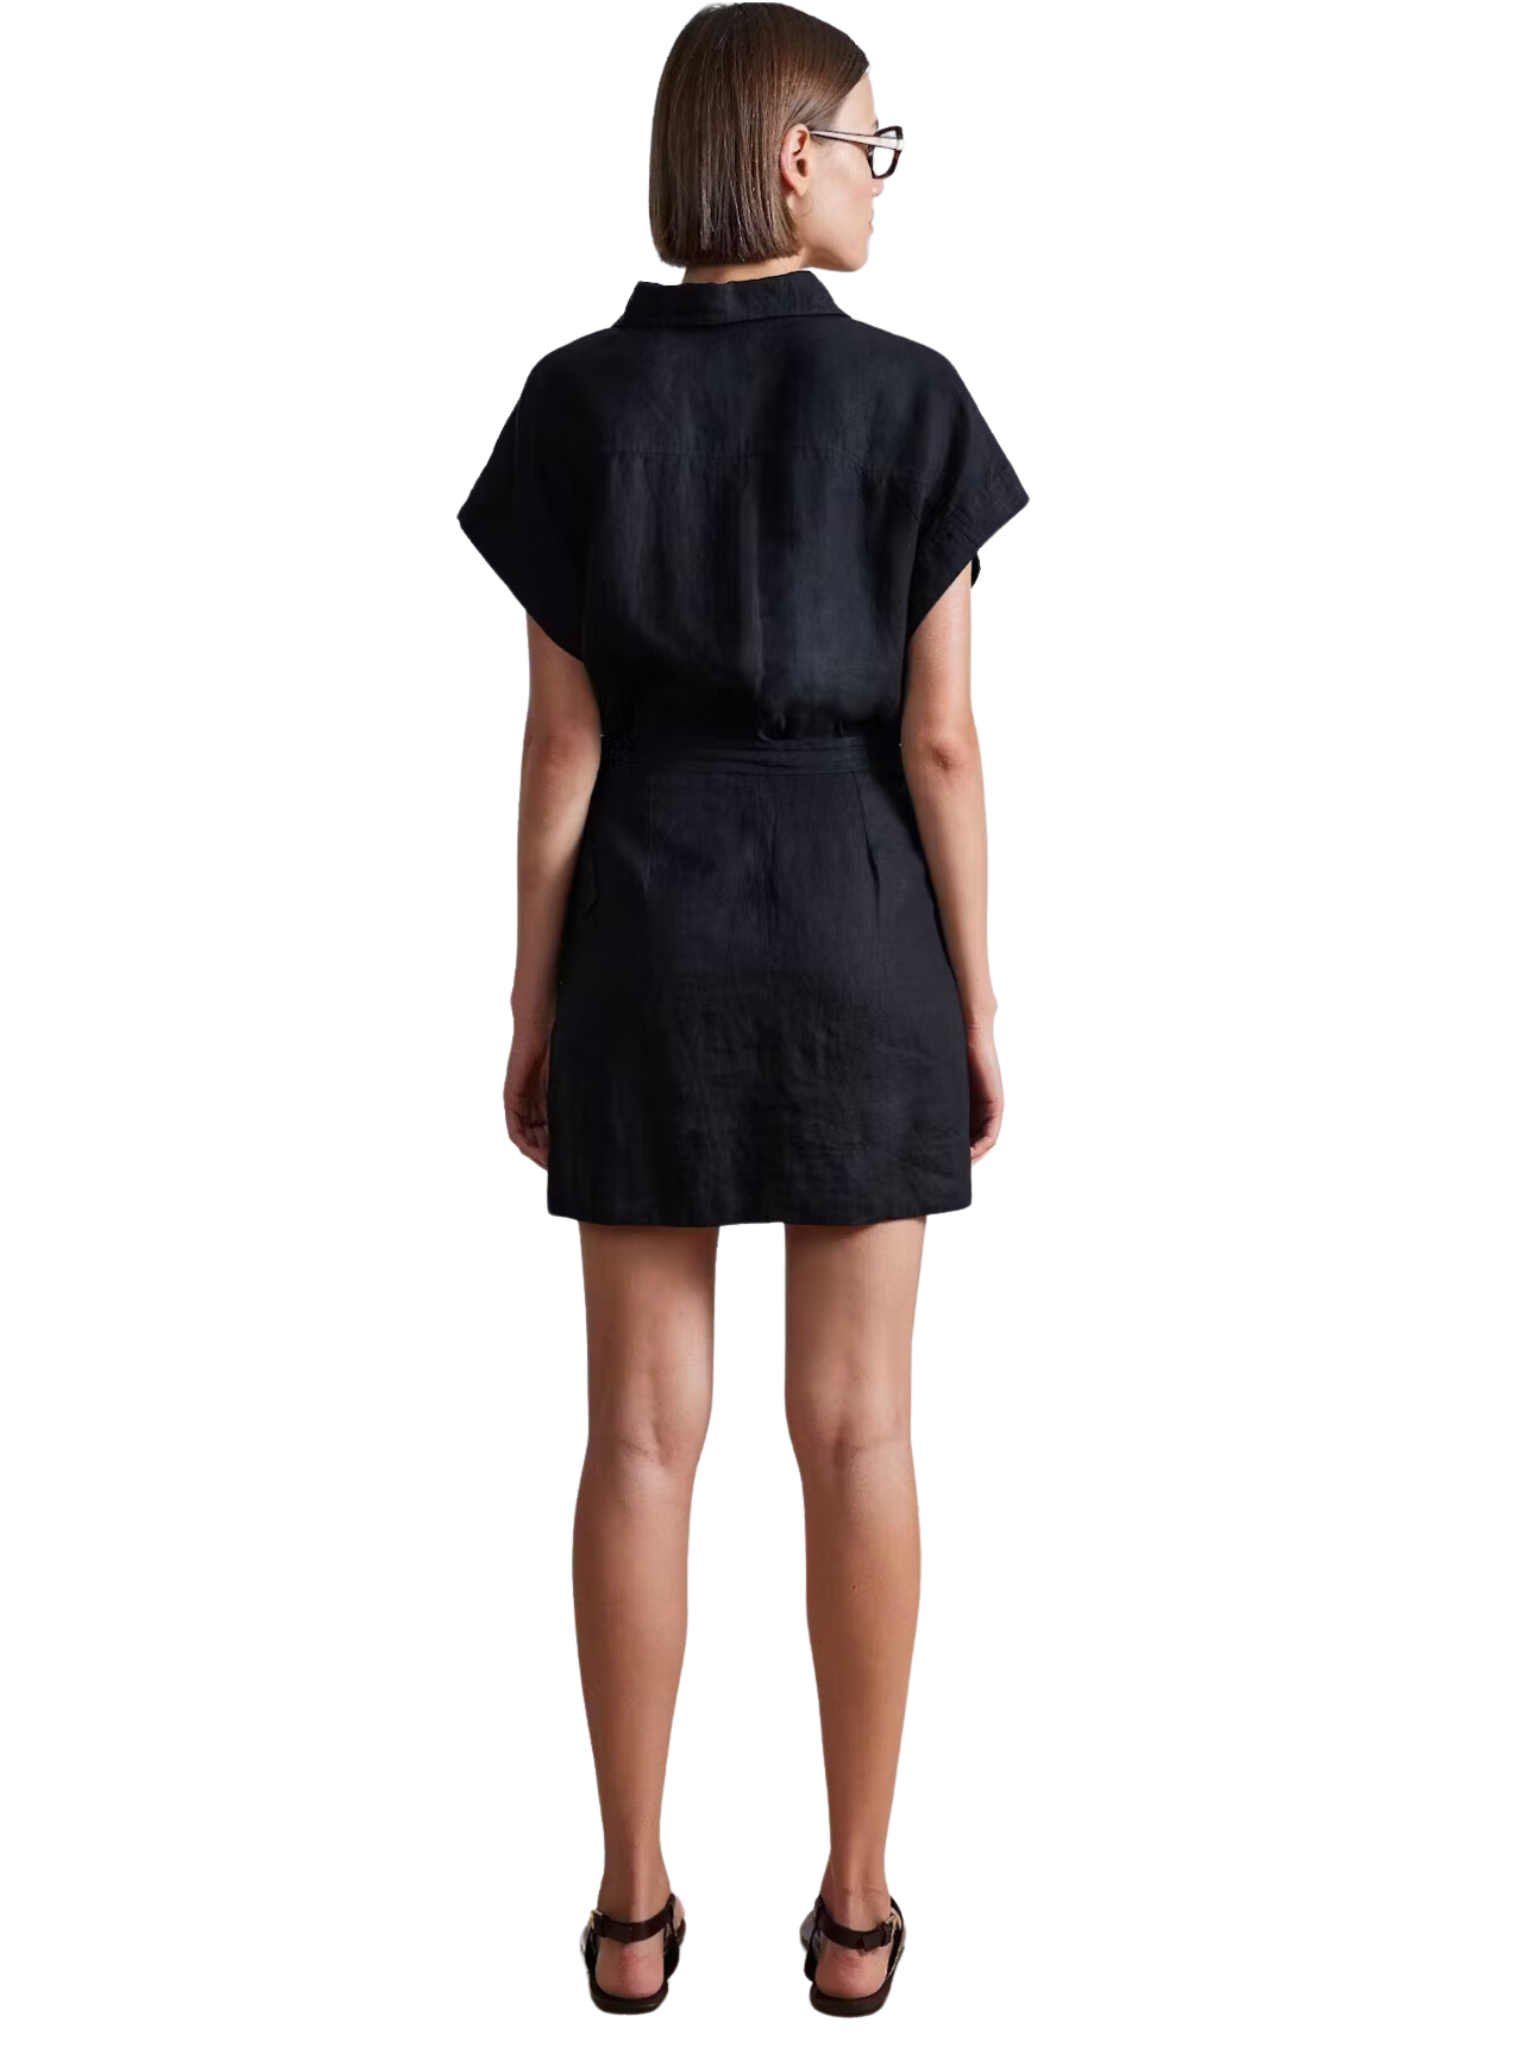 Elegant but effortless, the Black Catania Wrap Dress by Apiece Apart, combines classic shirting detail with a flattering overlap panel with a self tie waist to hit the mark for multiple occasions. Featuring a relaxed bodice with dolman sleeves, this mini will take you from desk to drinks and beyond!